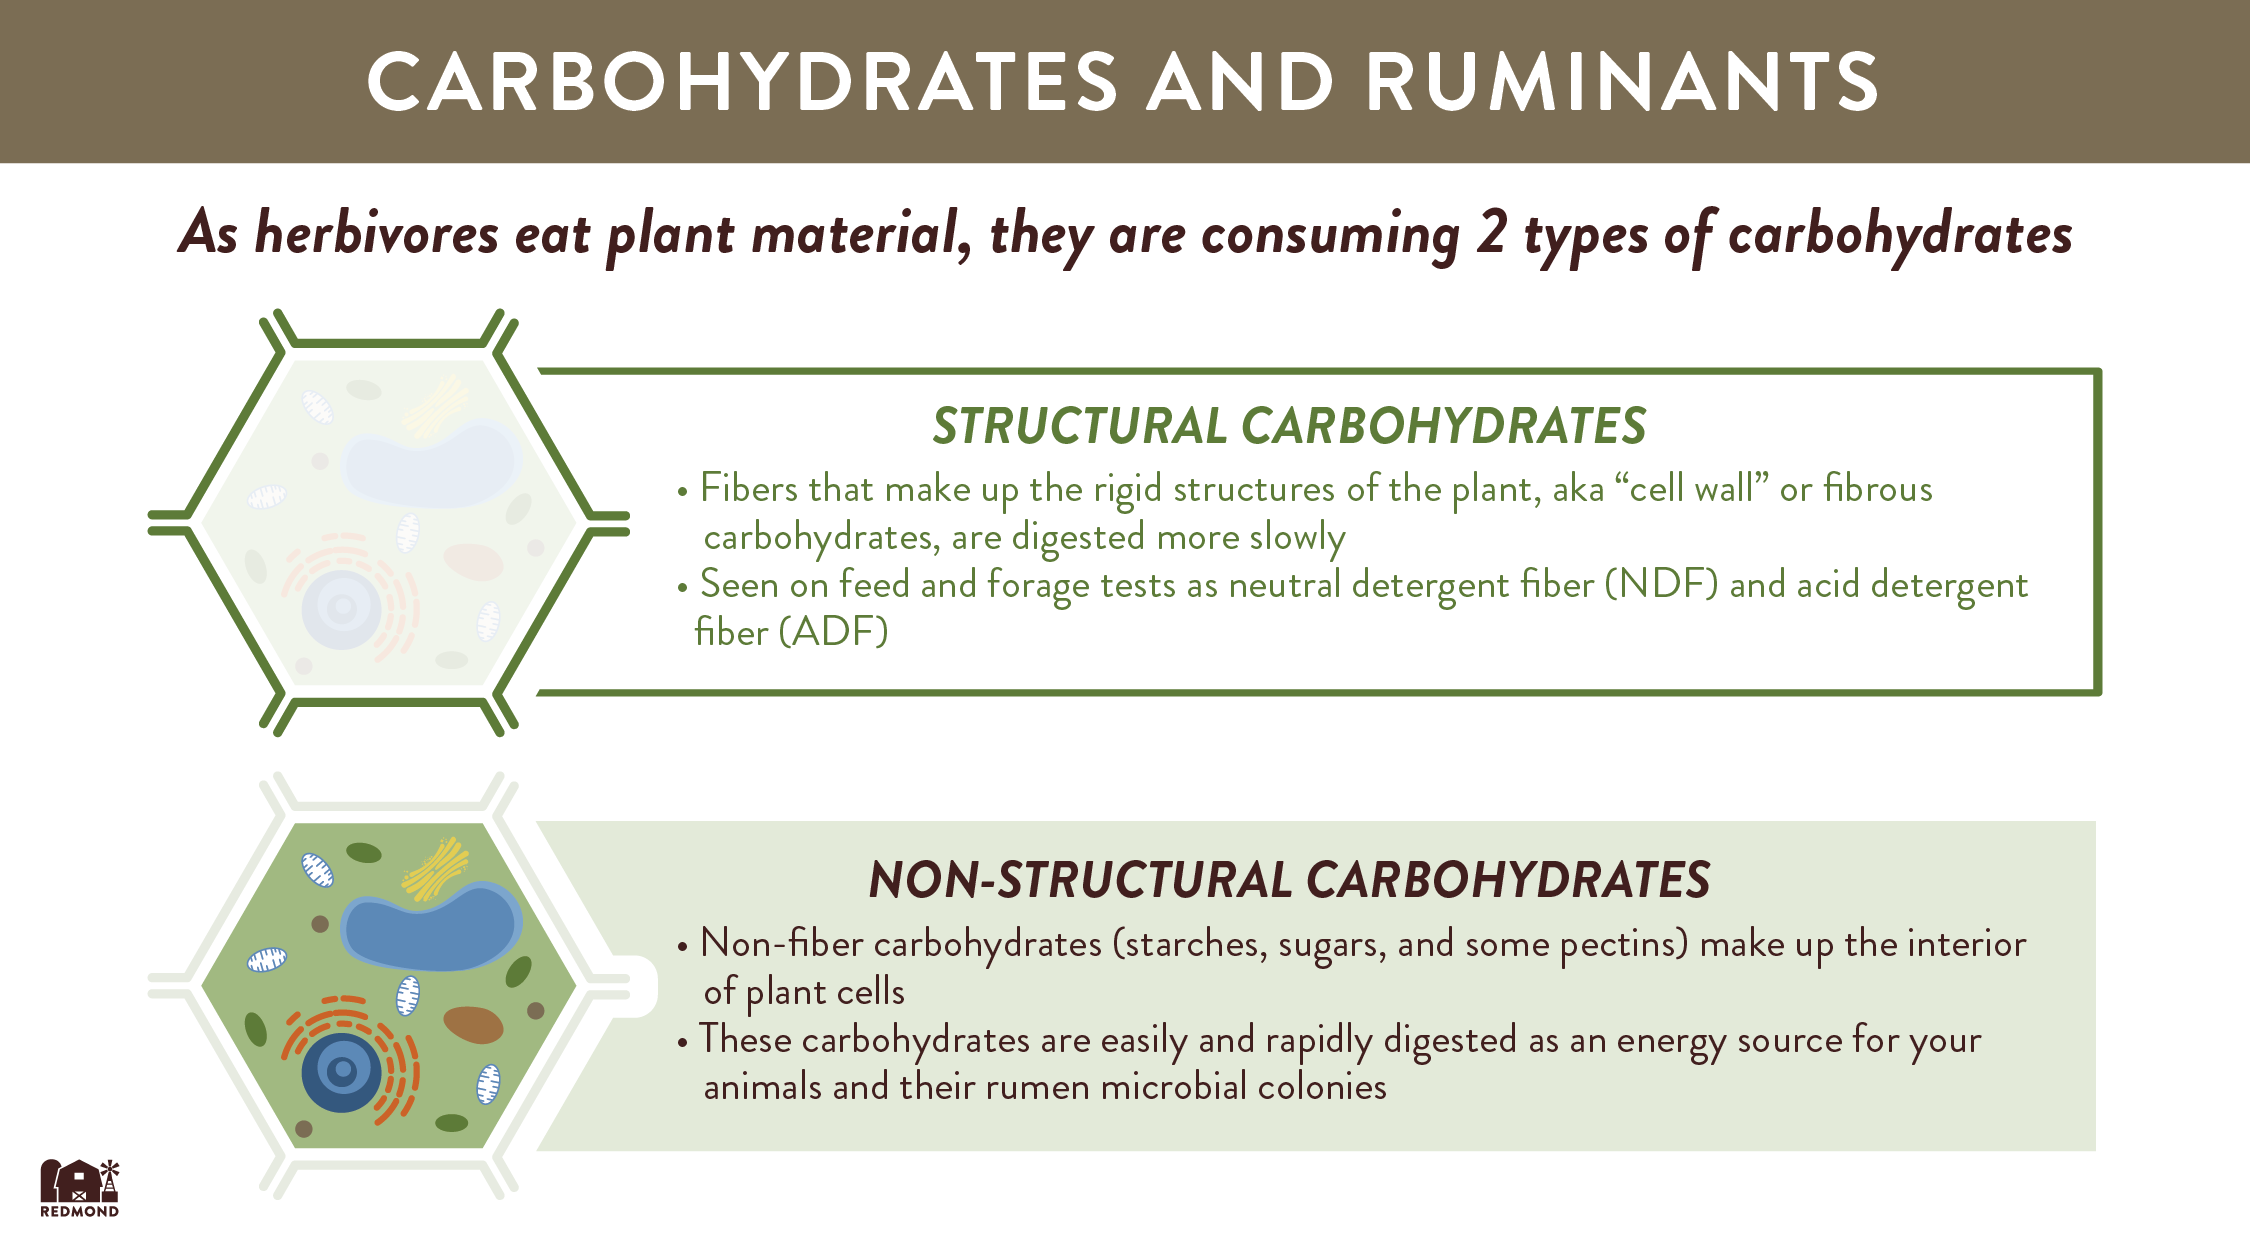 Types of carbohydrates for ruminants